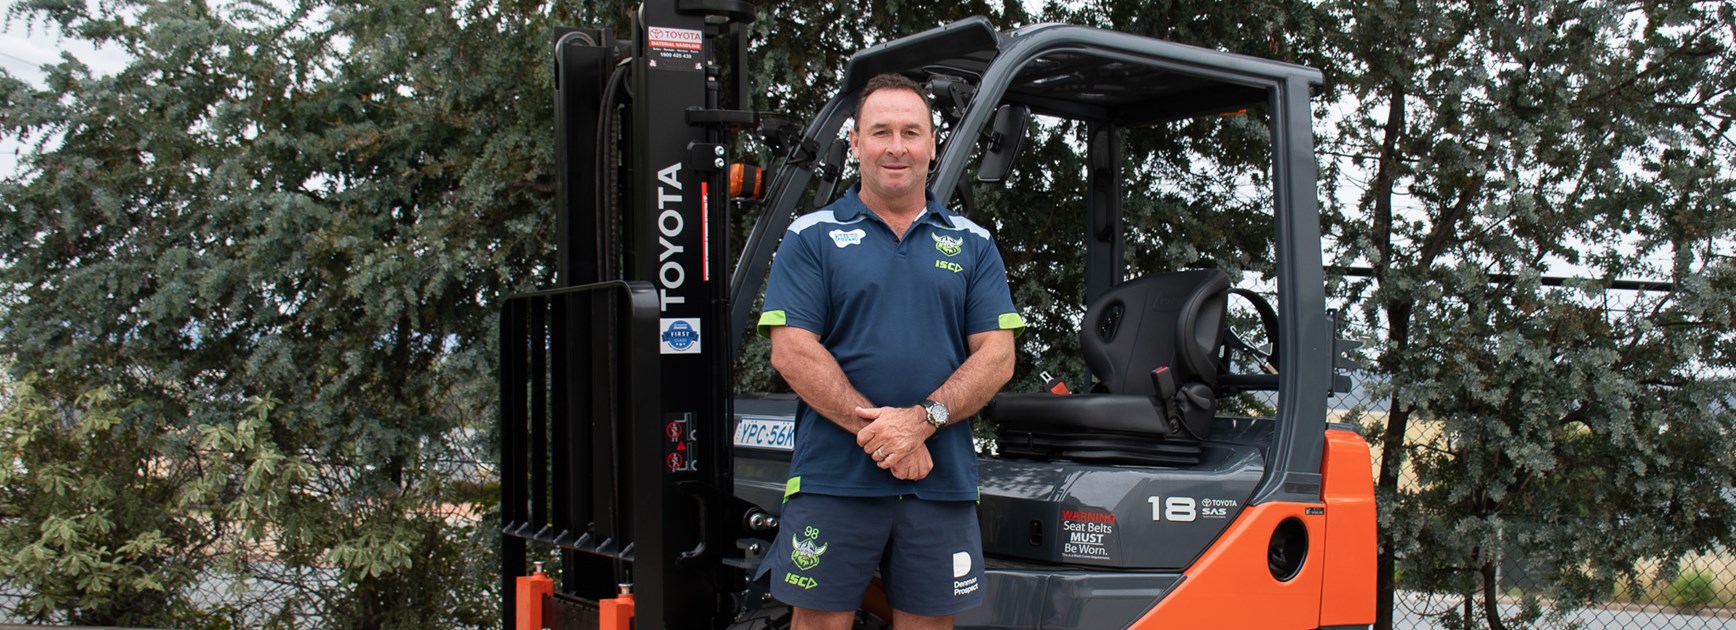 Toyota Forklifts to lift the Raiders to new heights in 2022 and beyond